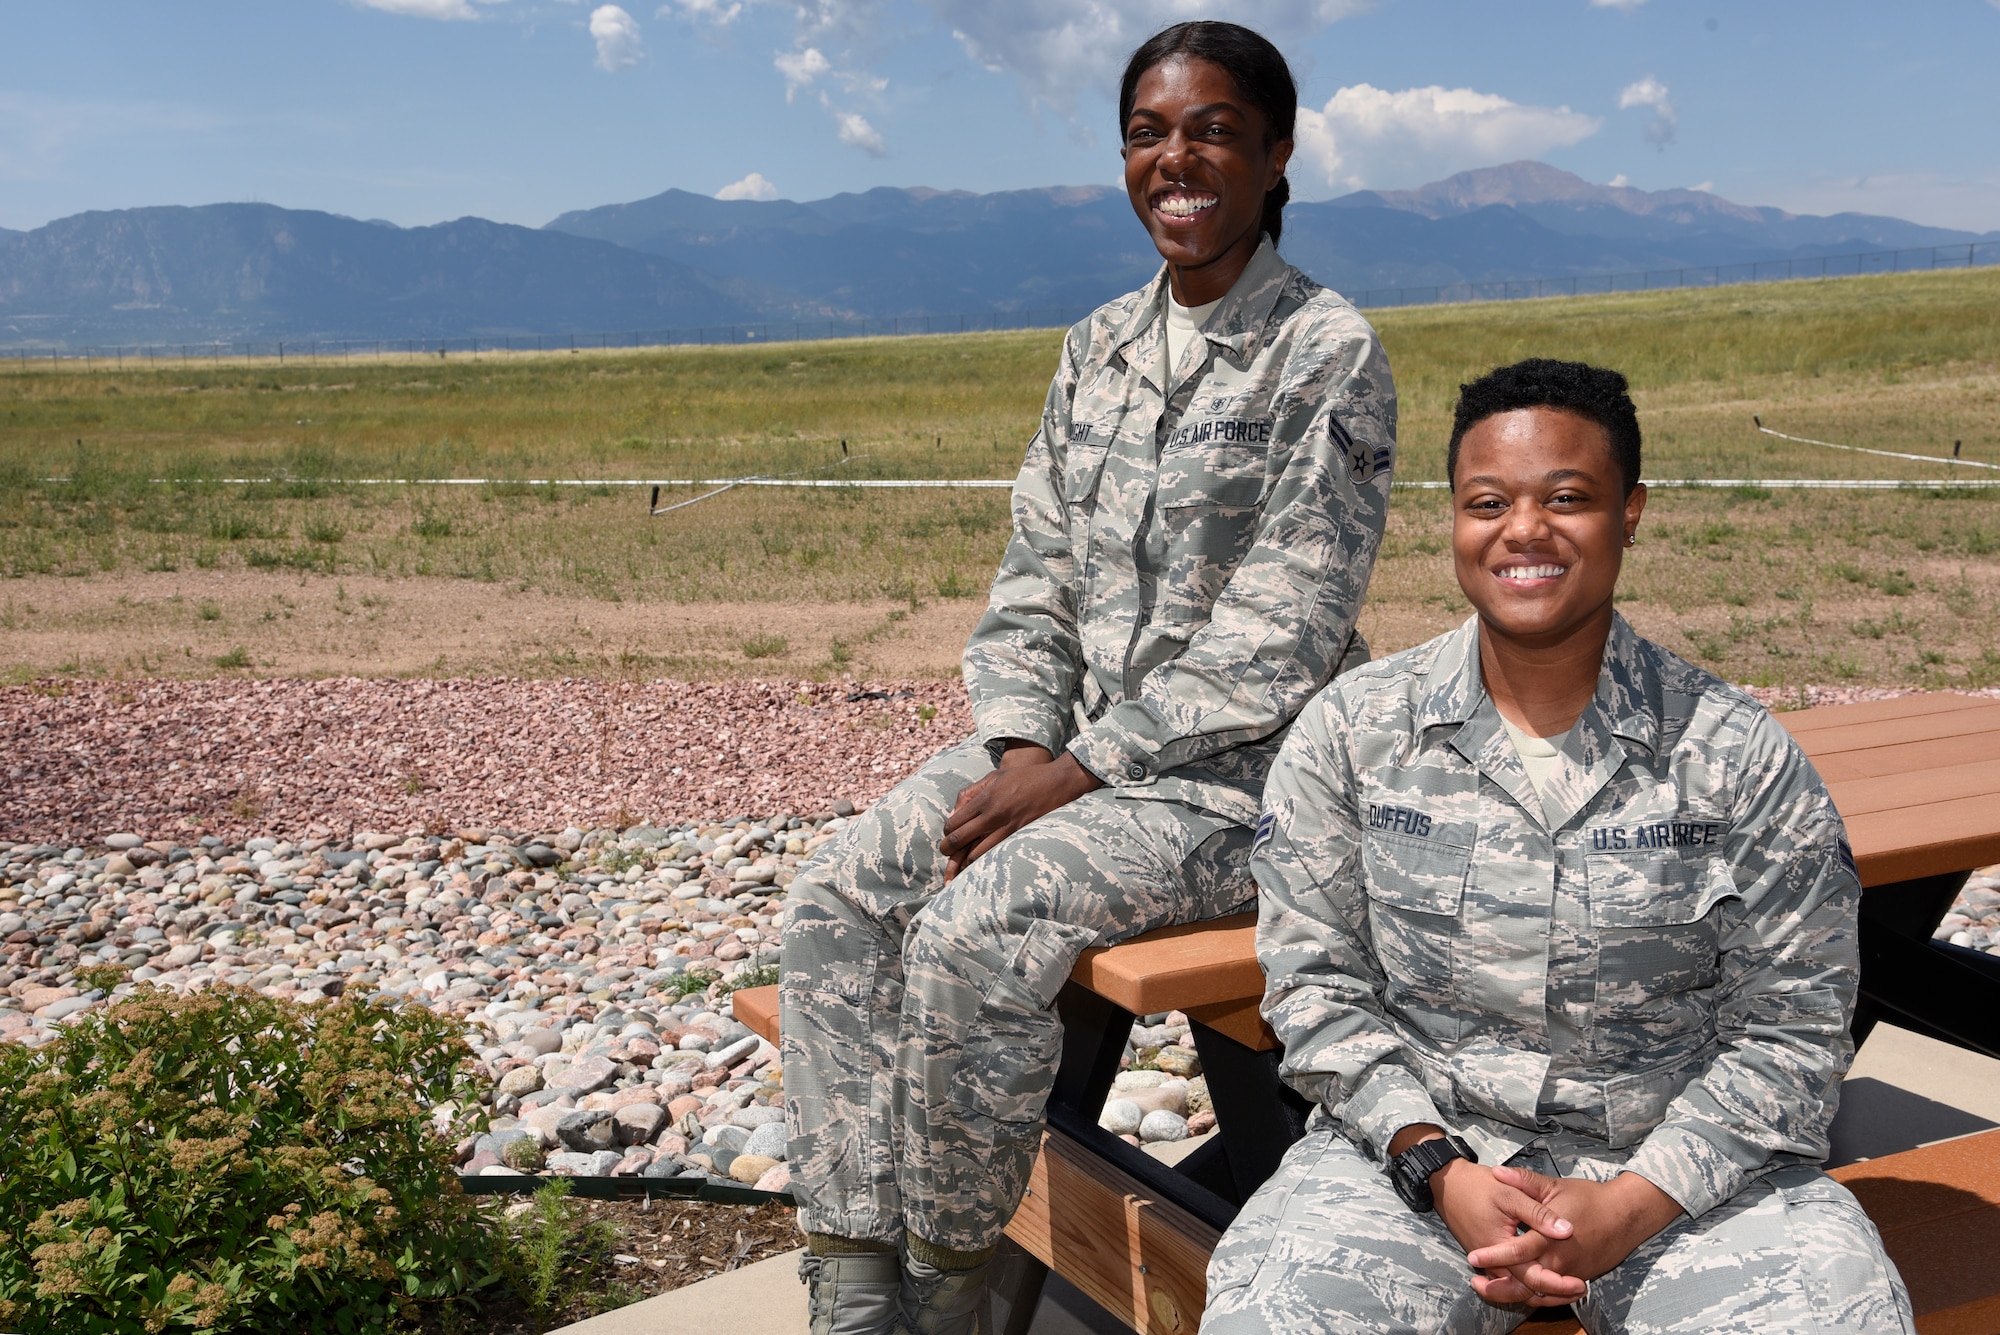 Airmen 1st Class Brittany Wright and Tiffany Duffus, 21st Operational Medical Readiness Squadron dental lab technicians, tell their story of successfully responding to a friend with suicidal thoughts Aug. 22, 2019 at Peterson Air Force Base, Colorado. Both Airmen received the Air Force Achievement Medal and were asked to attend the Air Force Association National Convention in September. (U.S. Air Force photo by Staff Sgt. Alexandra M. Longfellow)